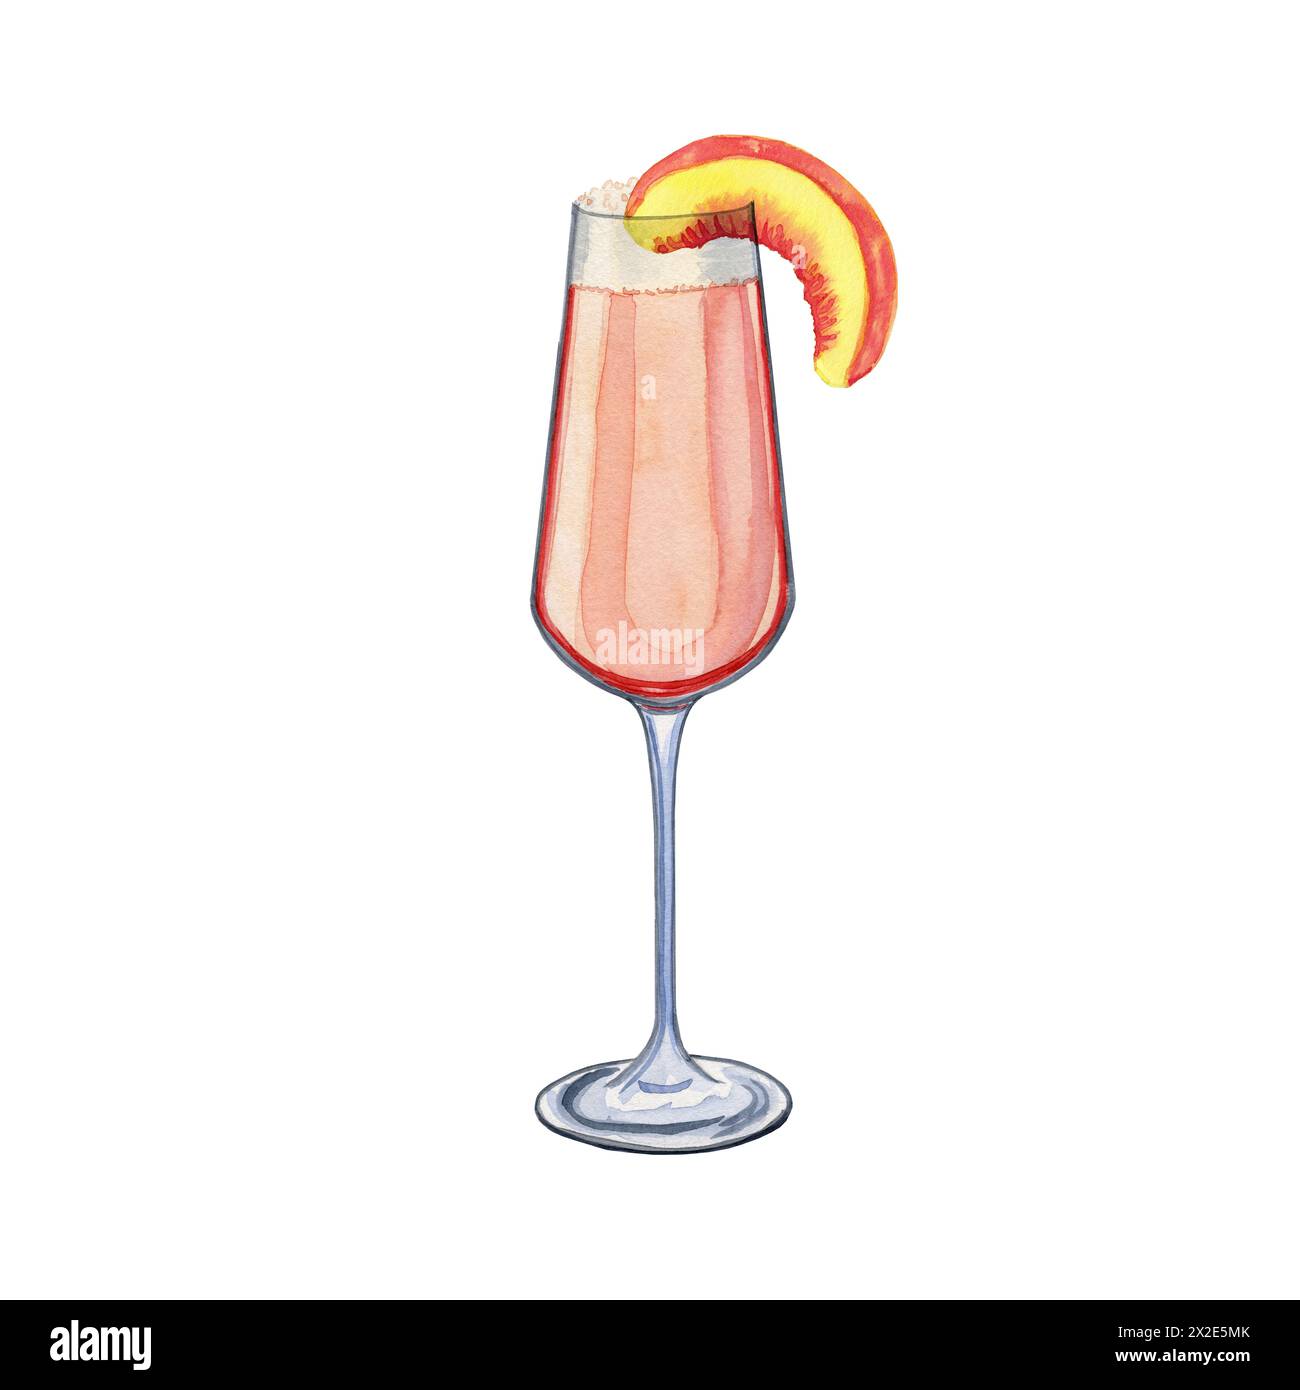 Bellini cocktail watercolor illustration. Hand drawn image of an alcoholic drink in a glass garnished with a piece of peach on an isolated background. Stock Photo